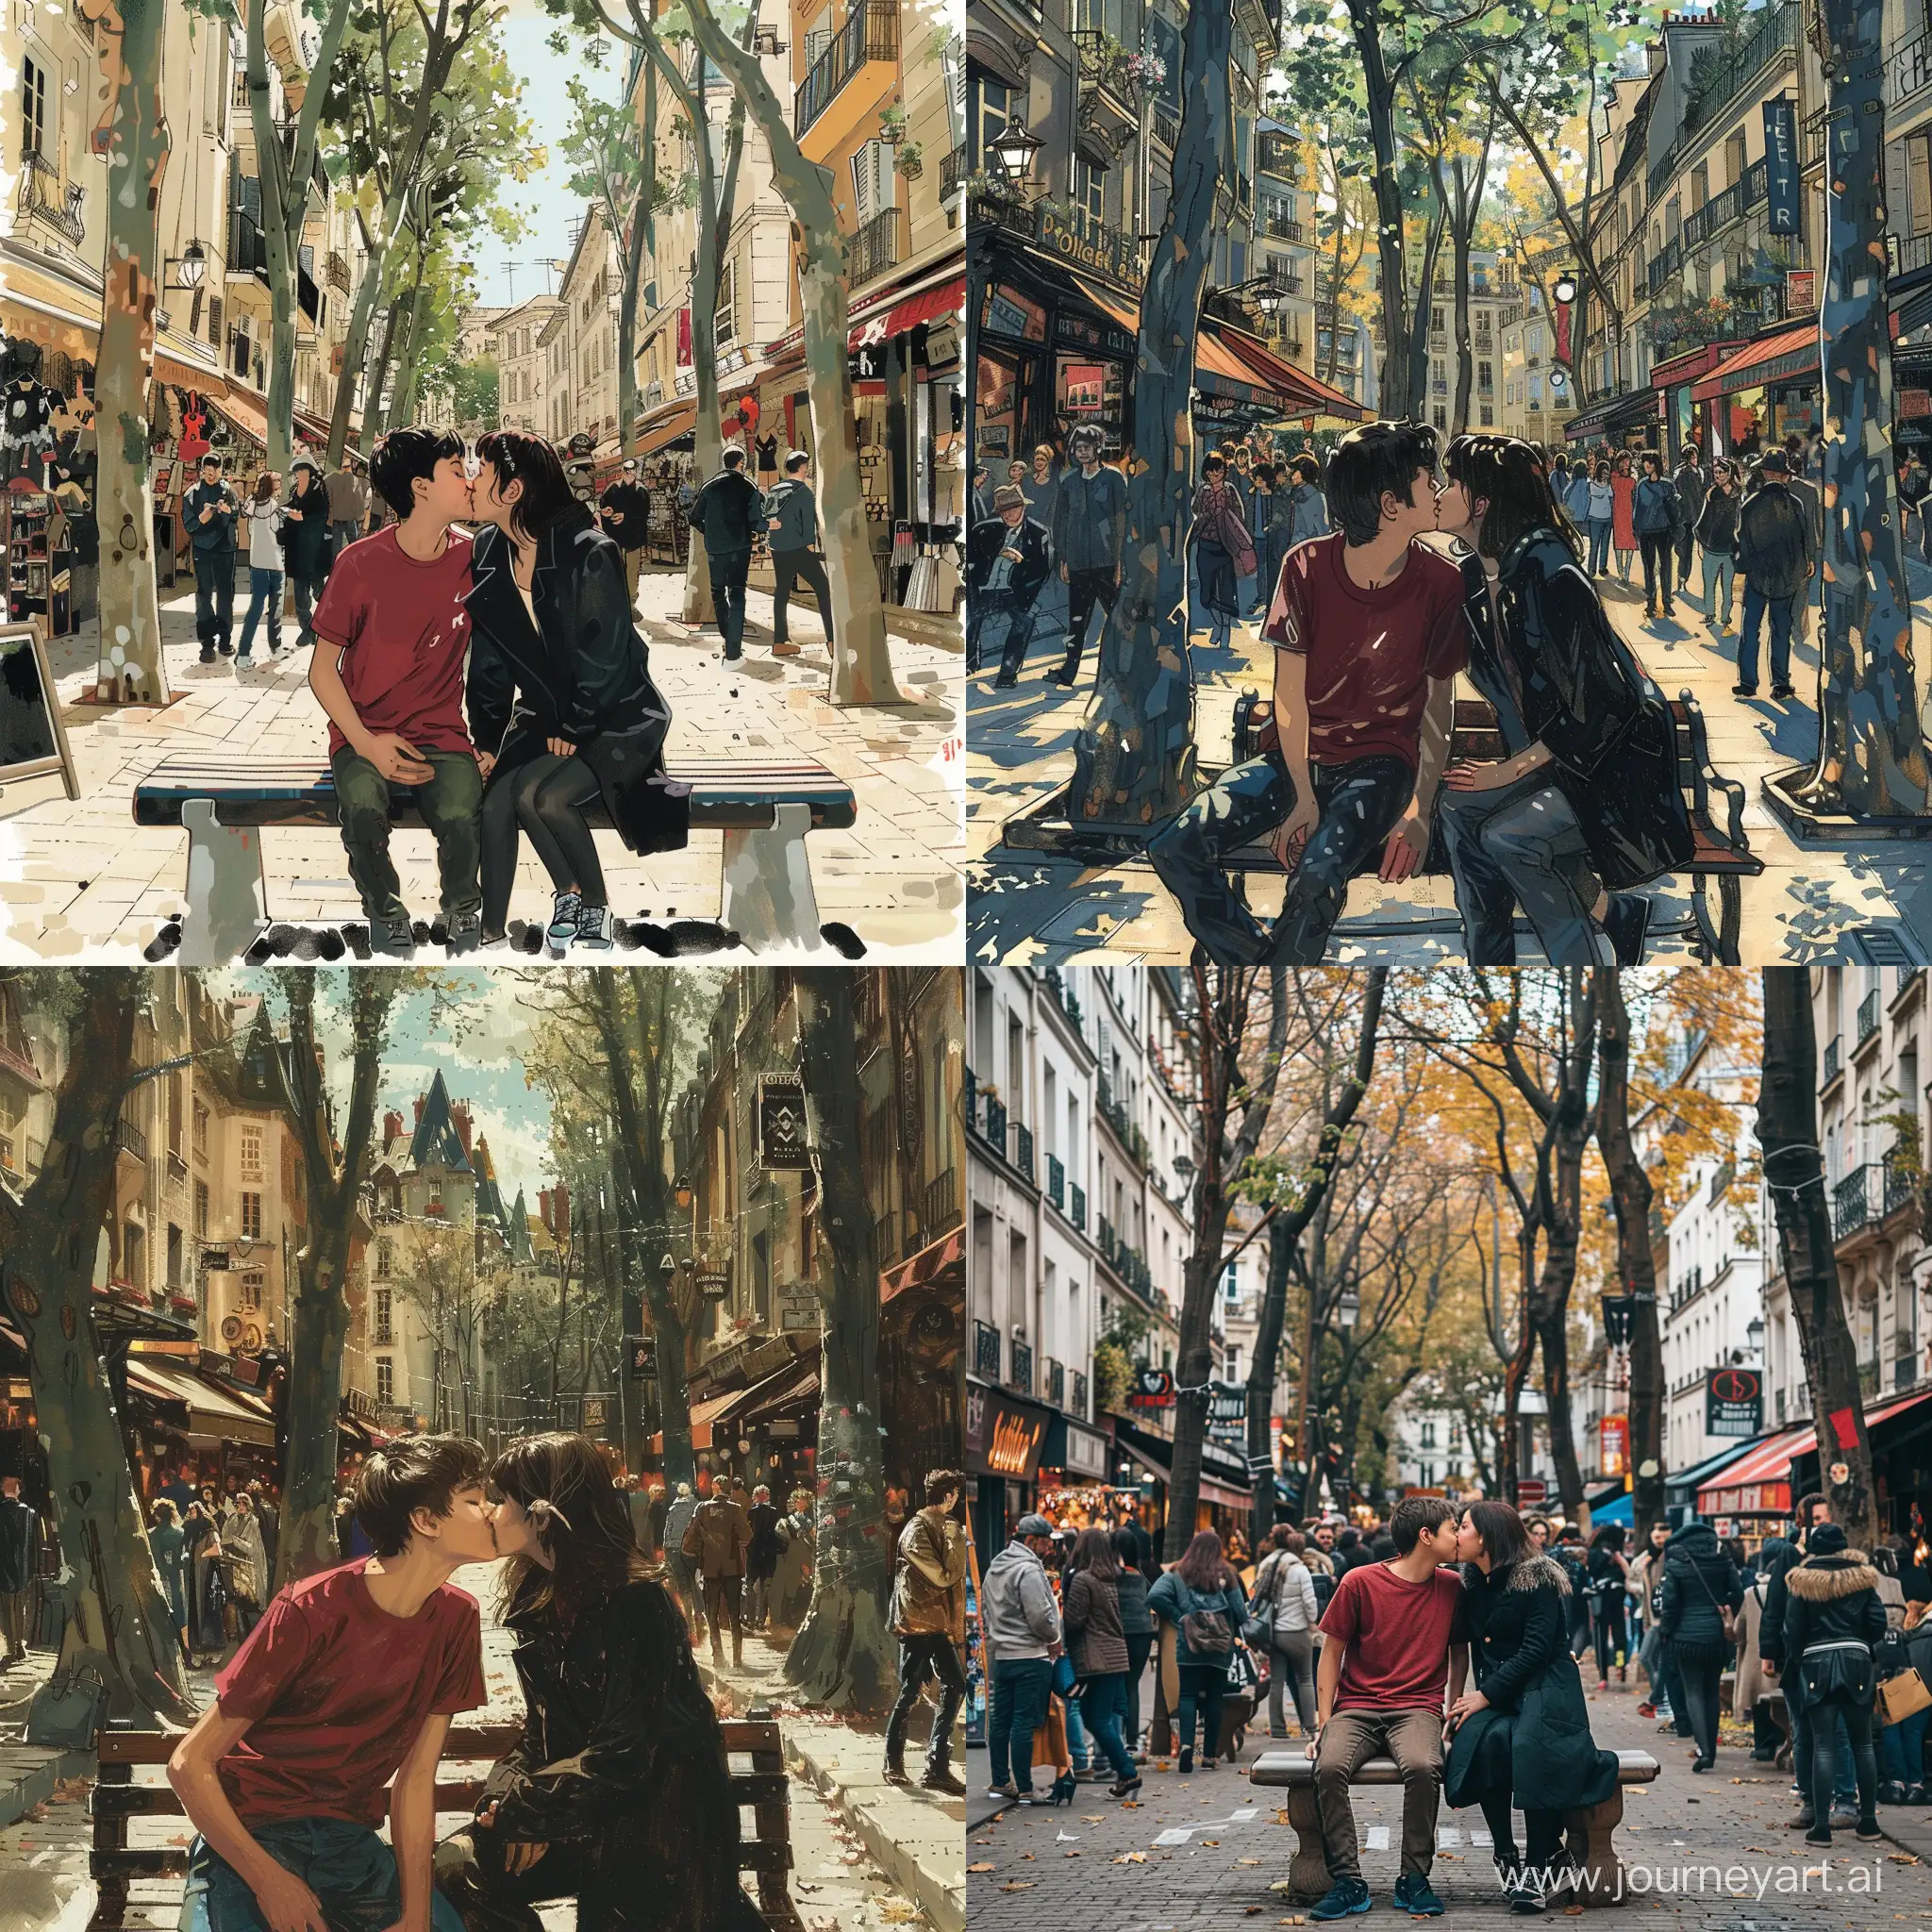 The street is paved with paved and pedestrian passages، and around tall trees، and there are shops on both sides of the street، and in the middle of the street on the bench a boy in a crimson t-shirt and a girl in a black overcoat kissing in the crowd. Girl and boy seating